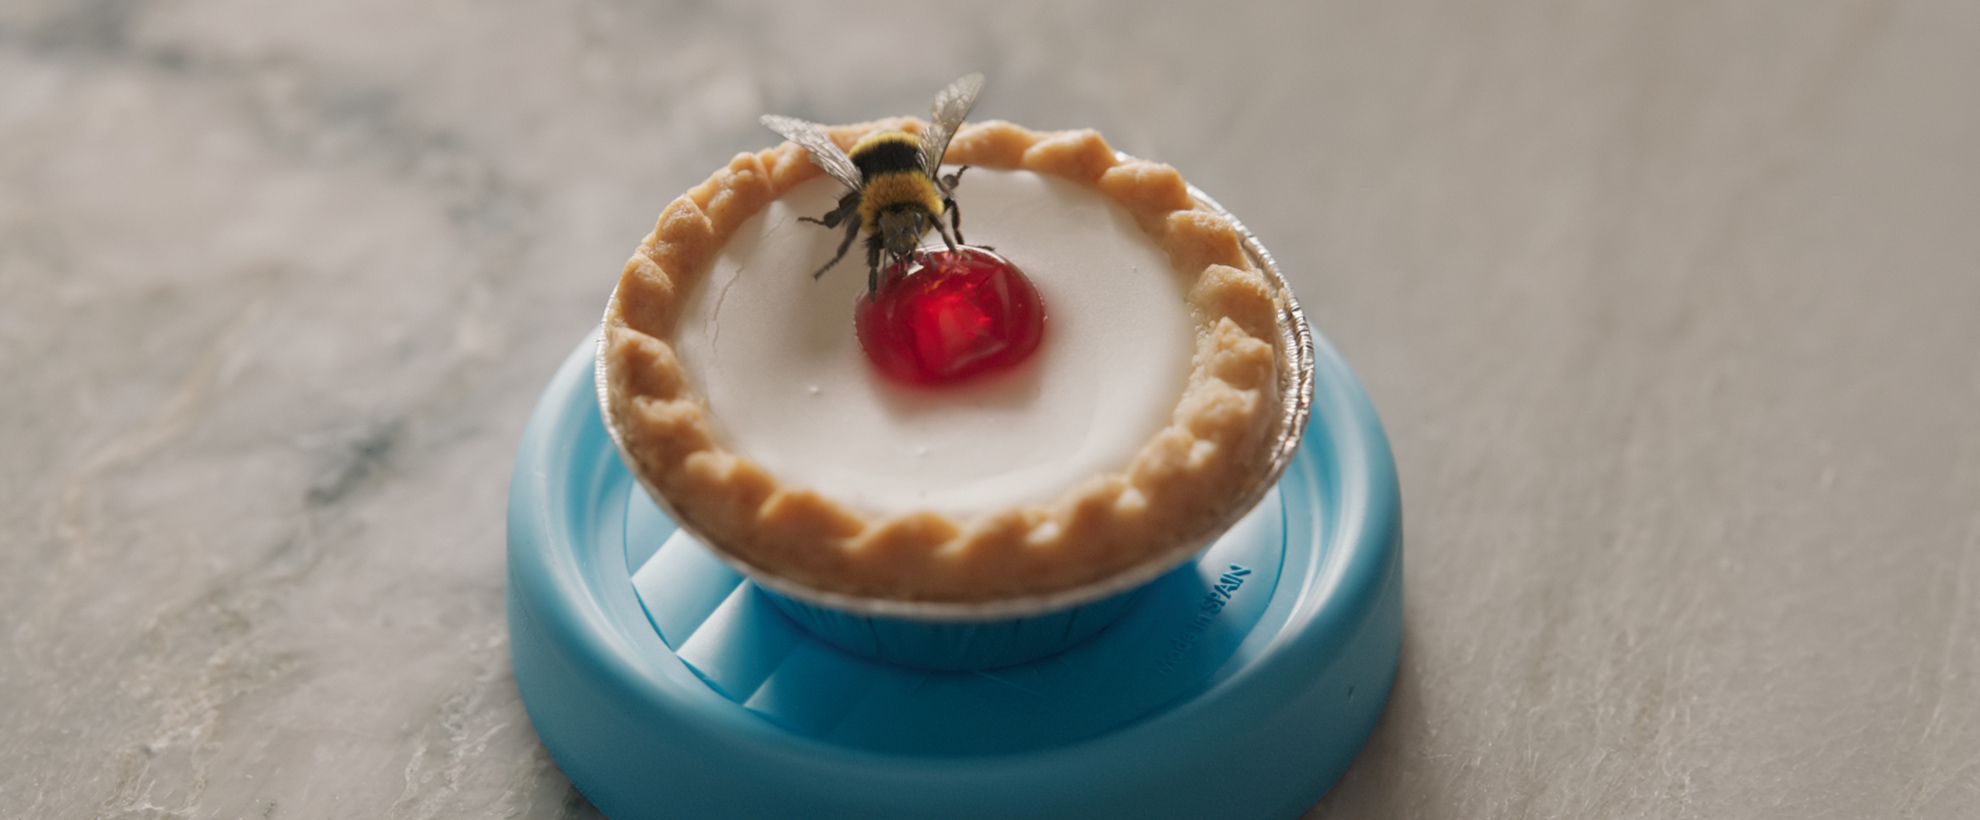 A bee on a small iced tart, sitting on a kitchen counter